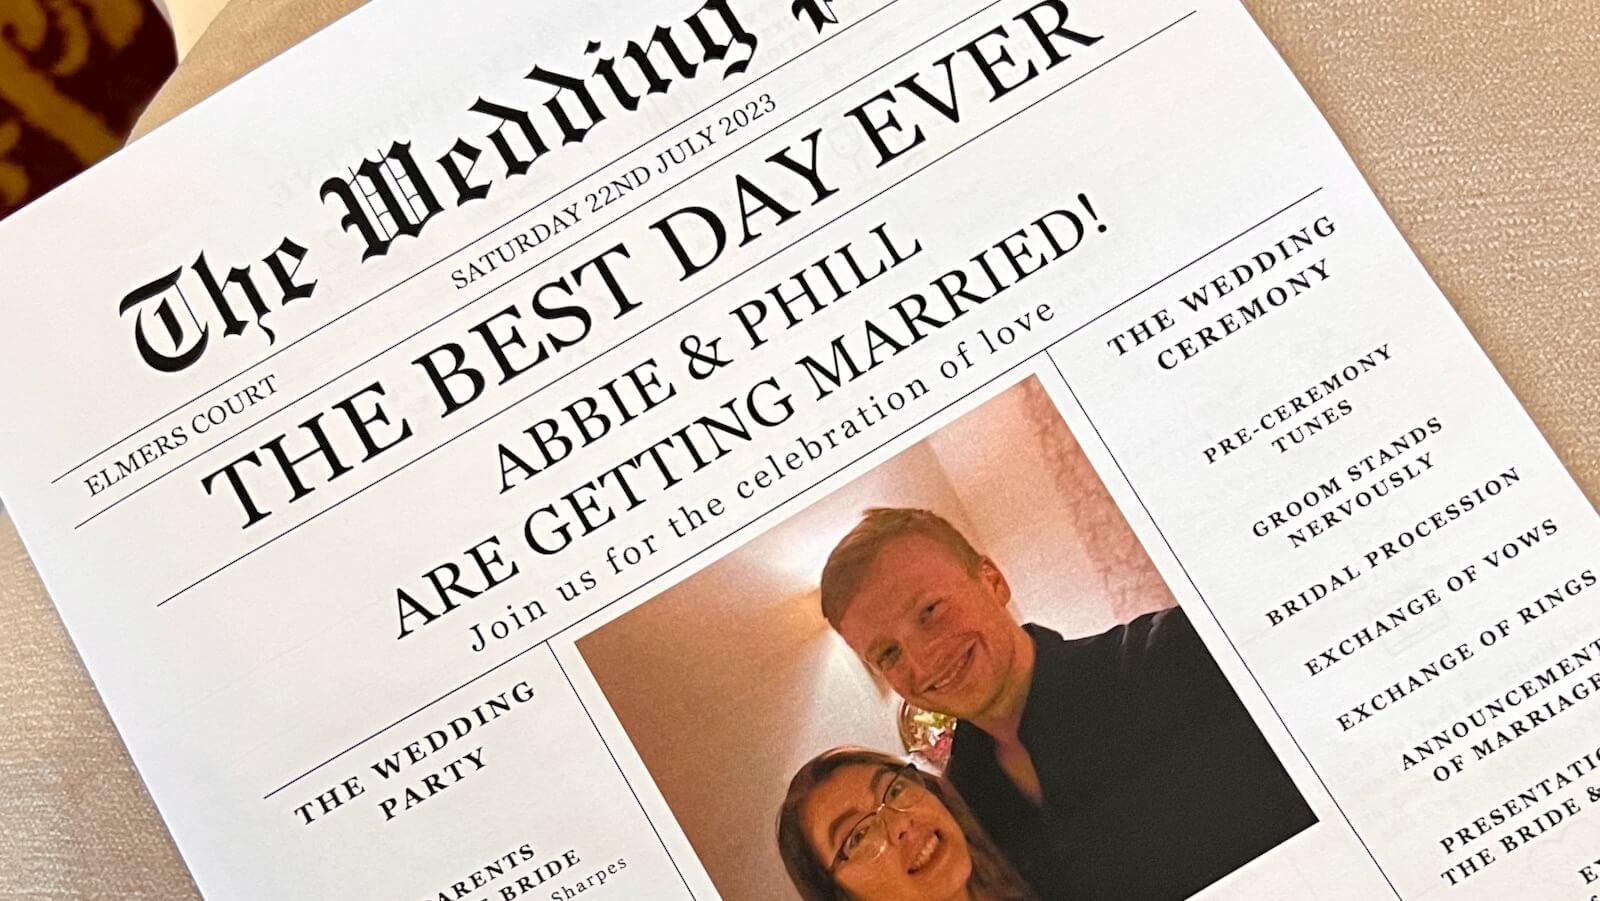 Abbie and Phill got married!